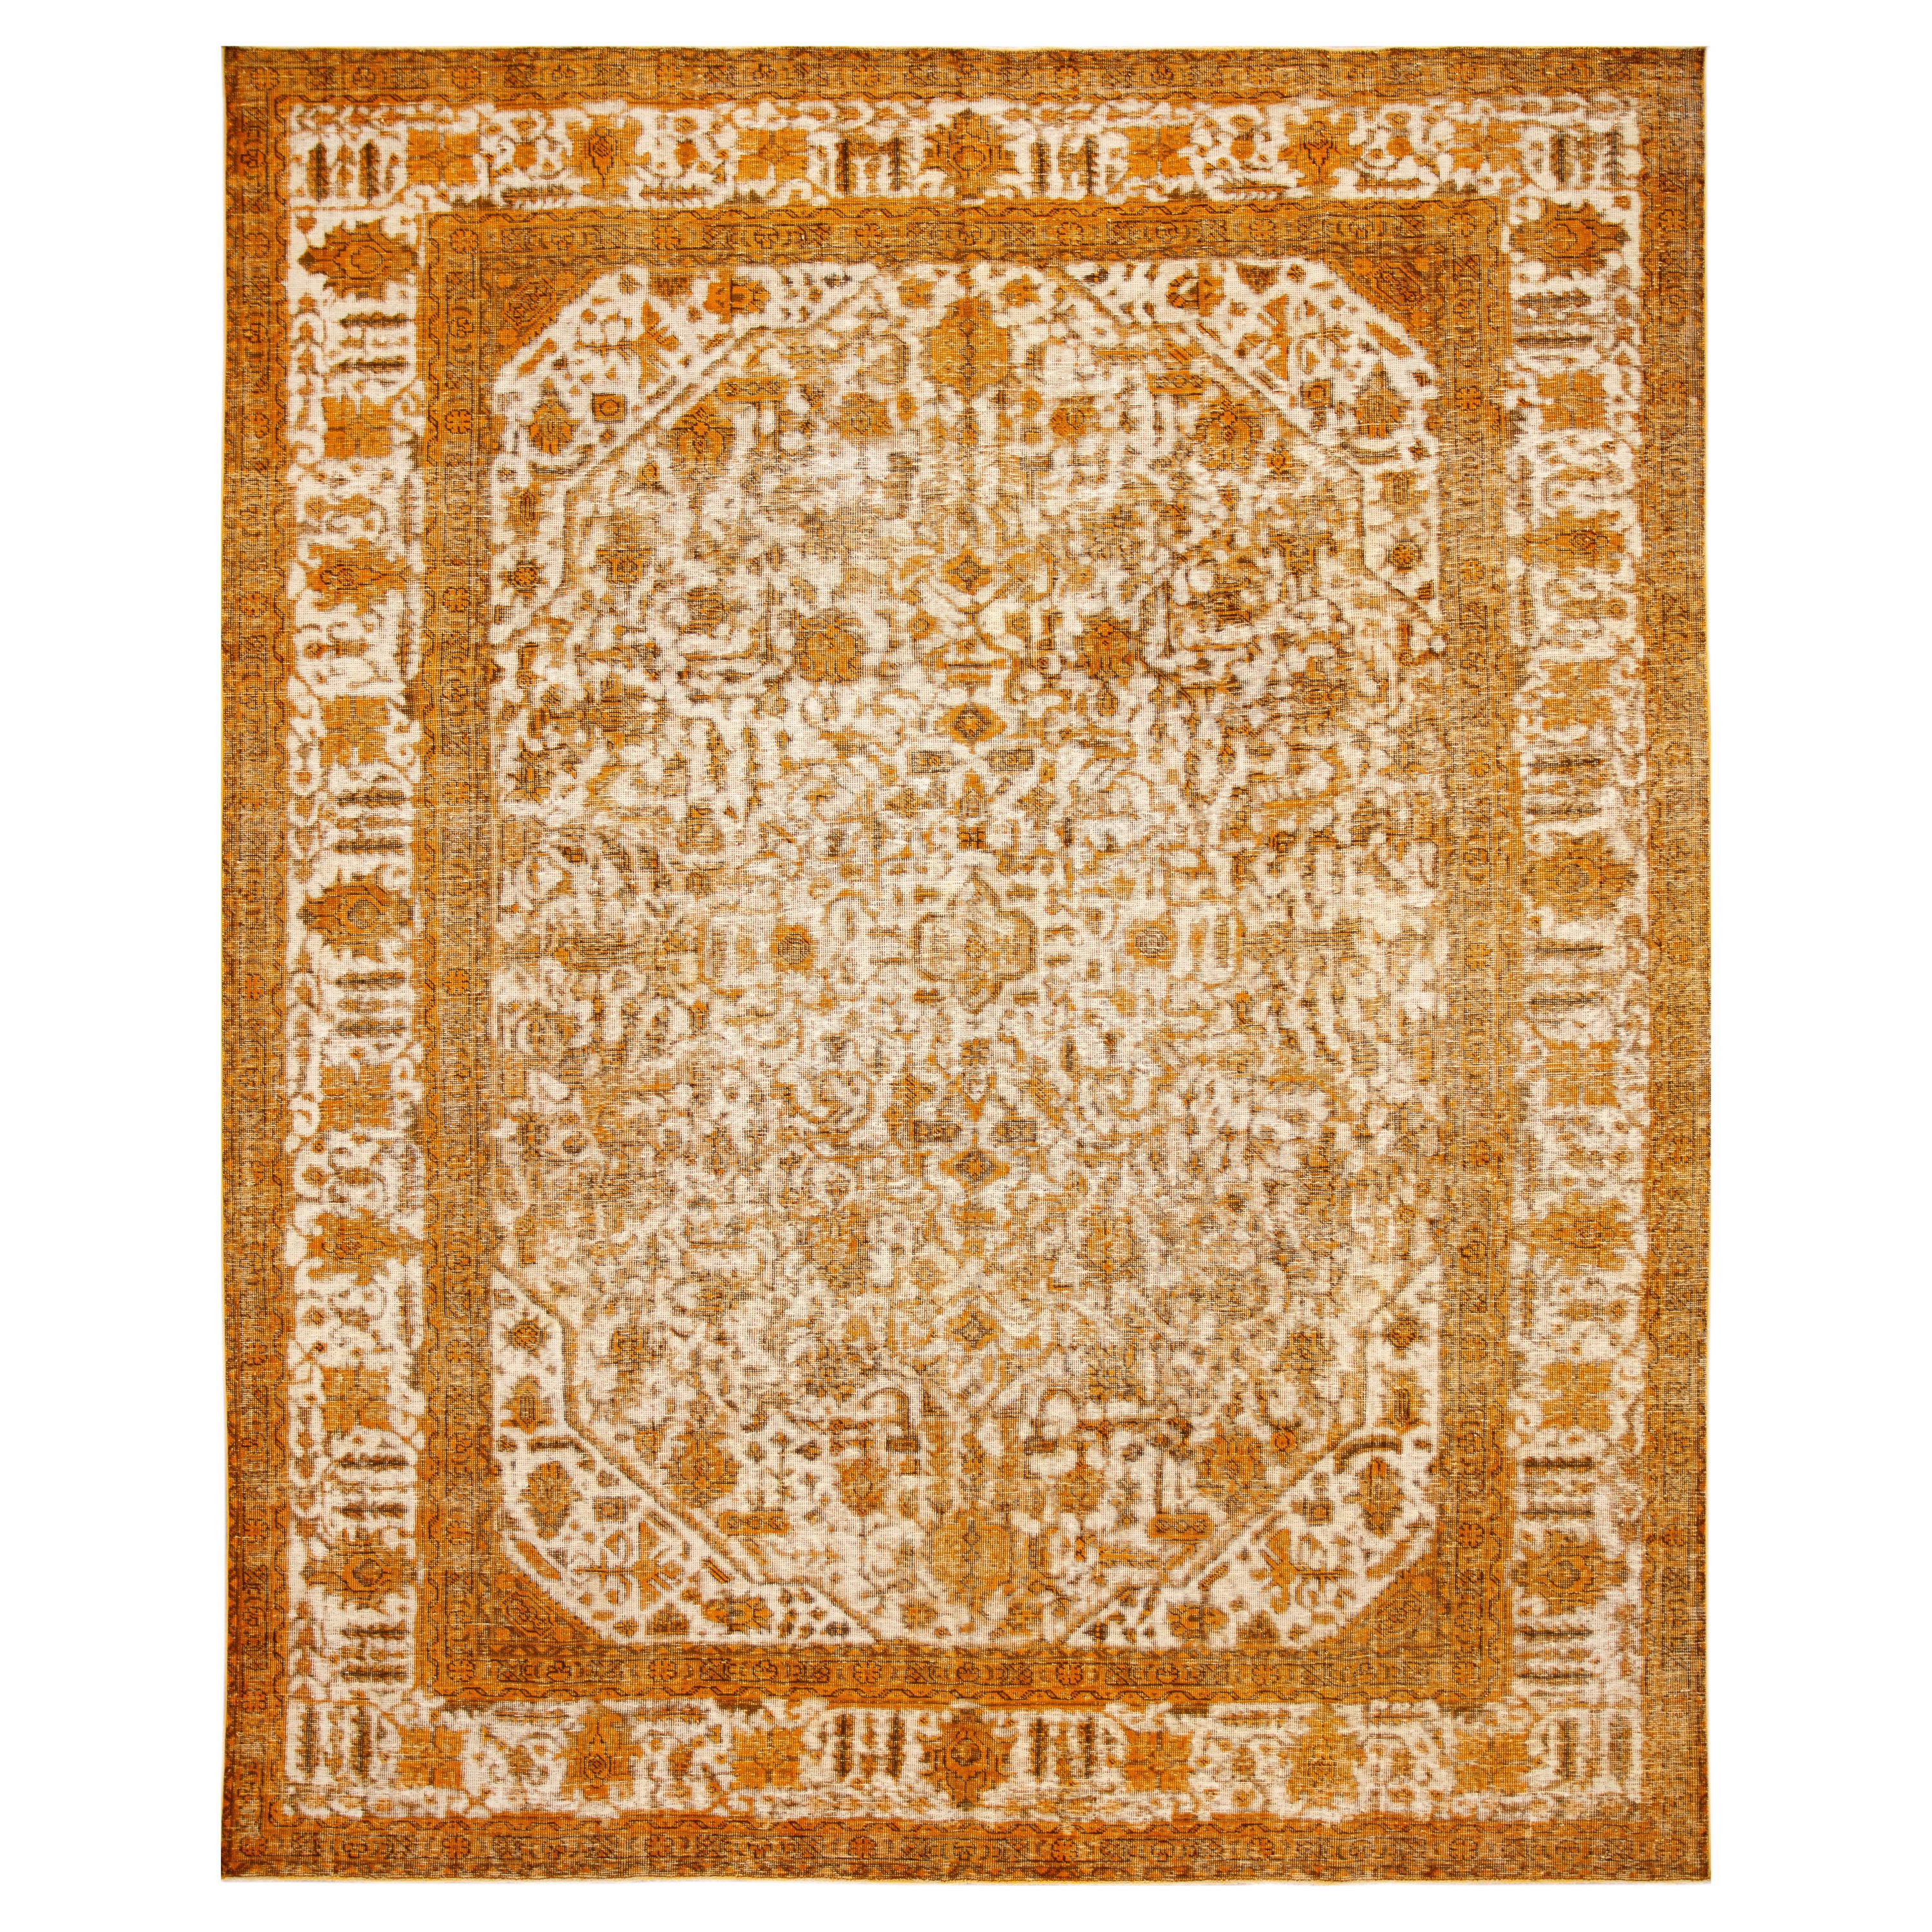 1960s Allover Handmade Vintage Overdyed Wool Rug in Orange and Beige Color